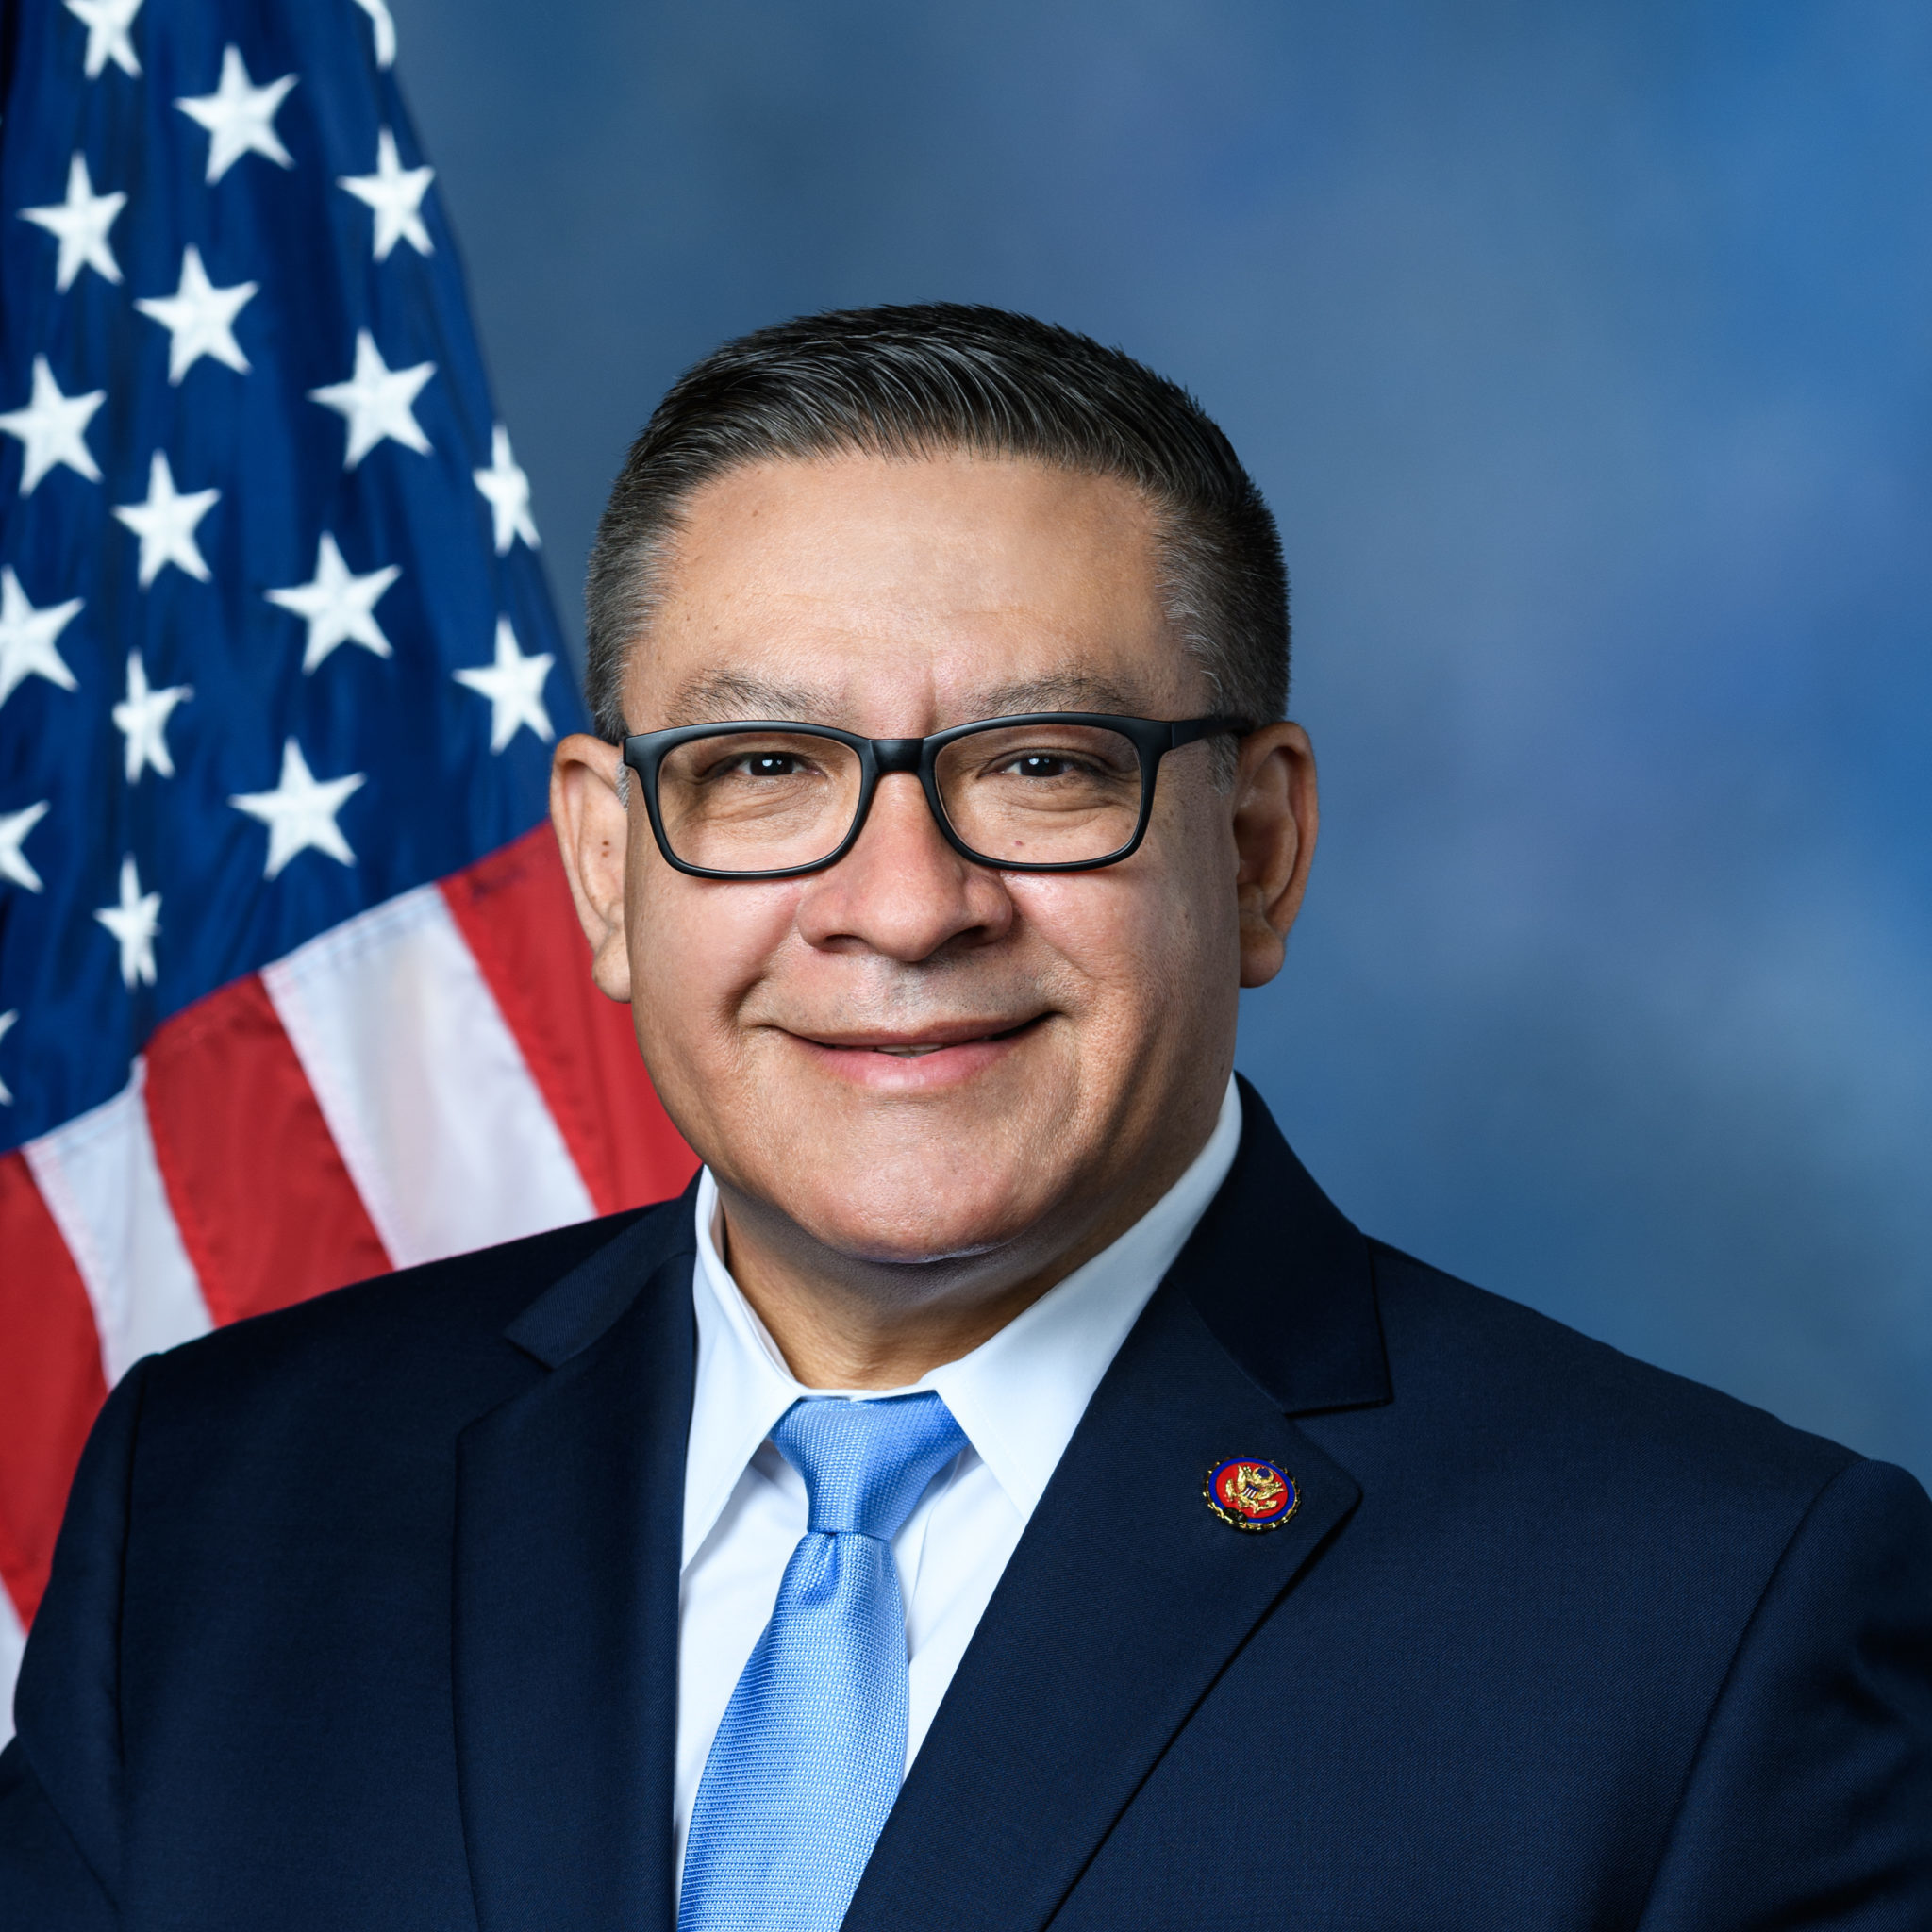 The Honorable Salud Carbajal